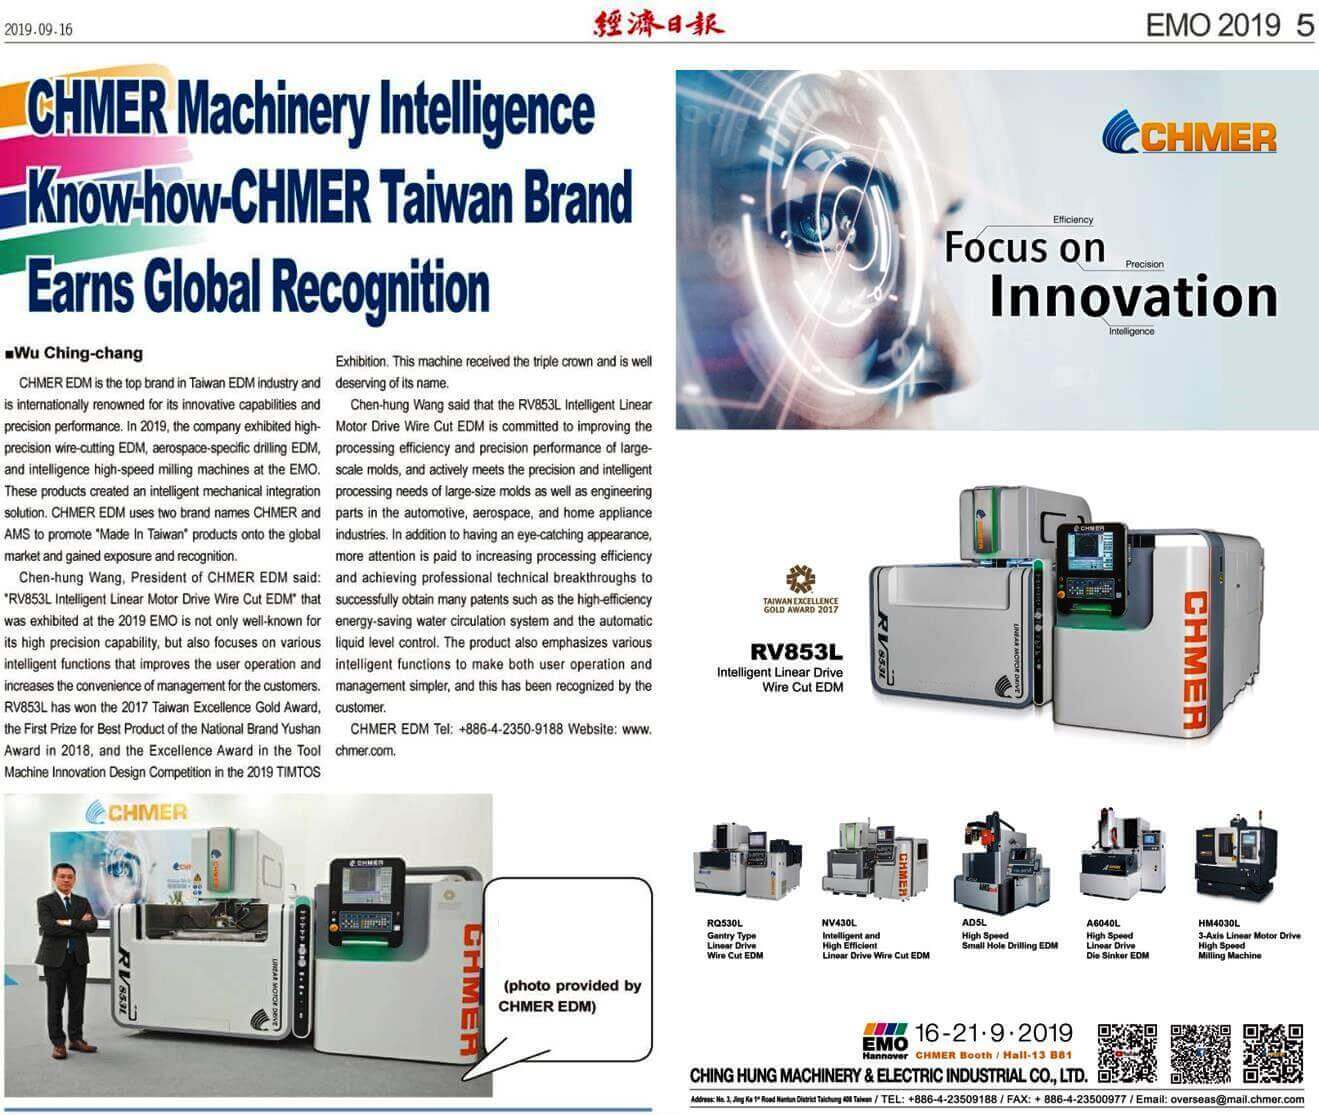 CHMER Taiwan Brand Earns Global Recognition